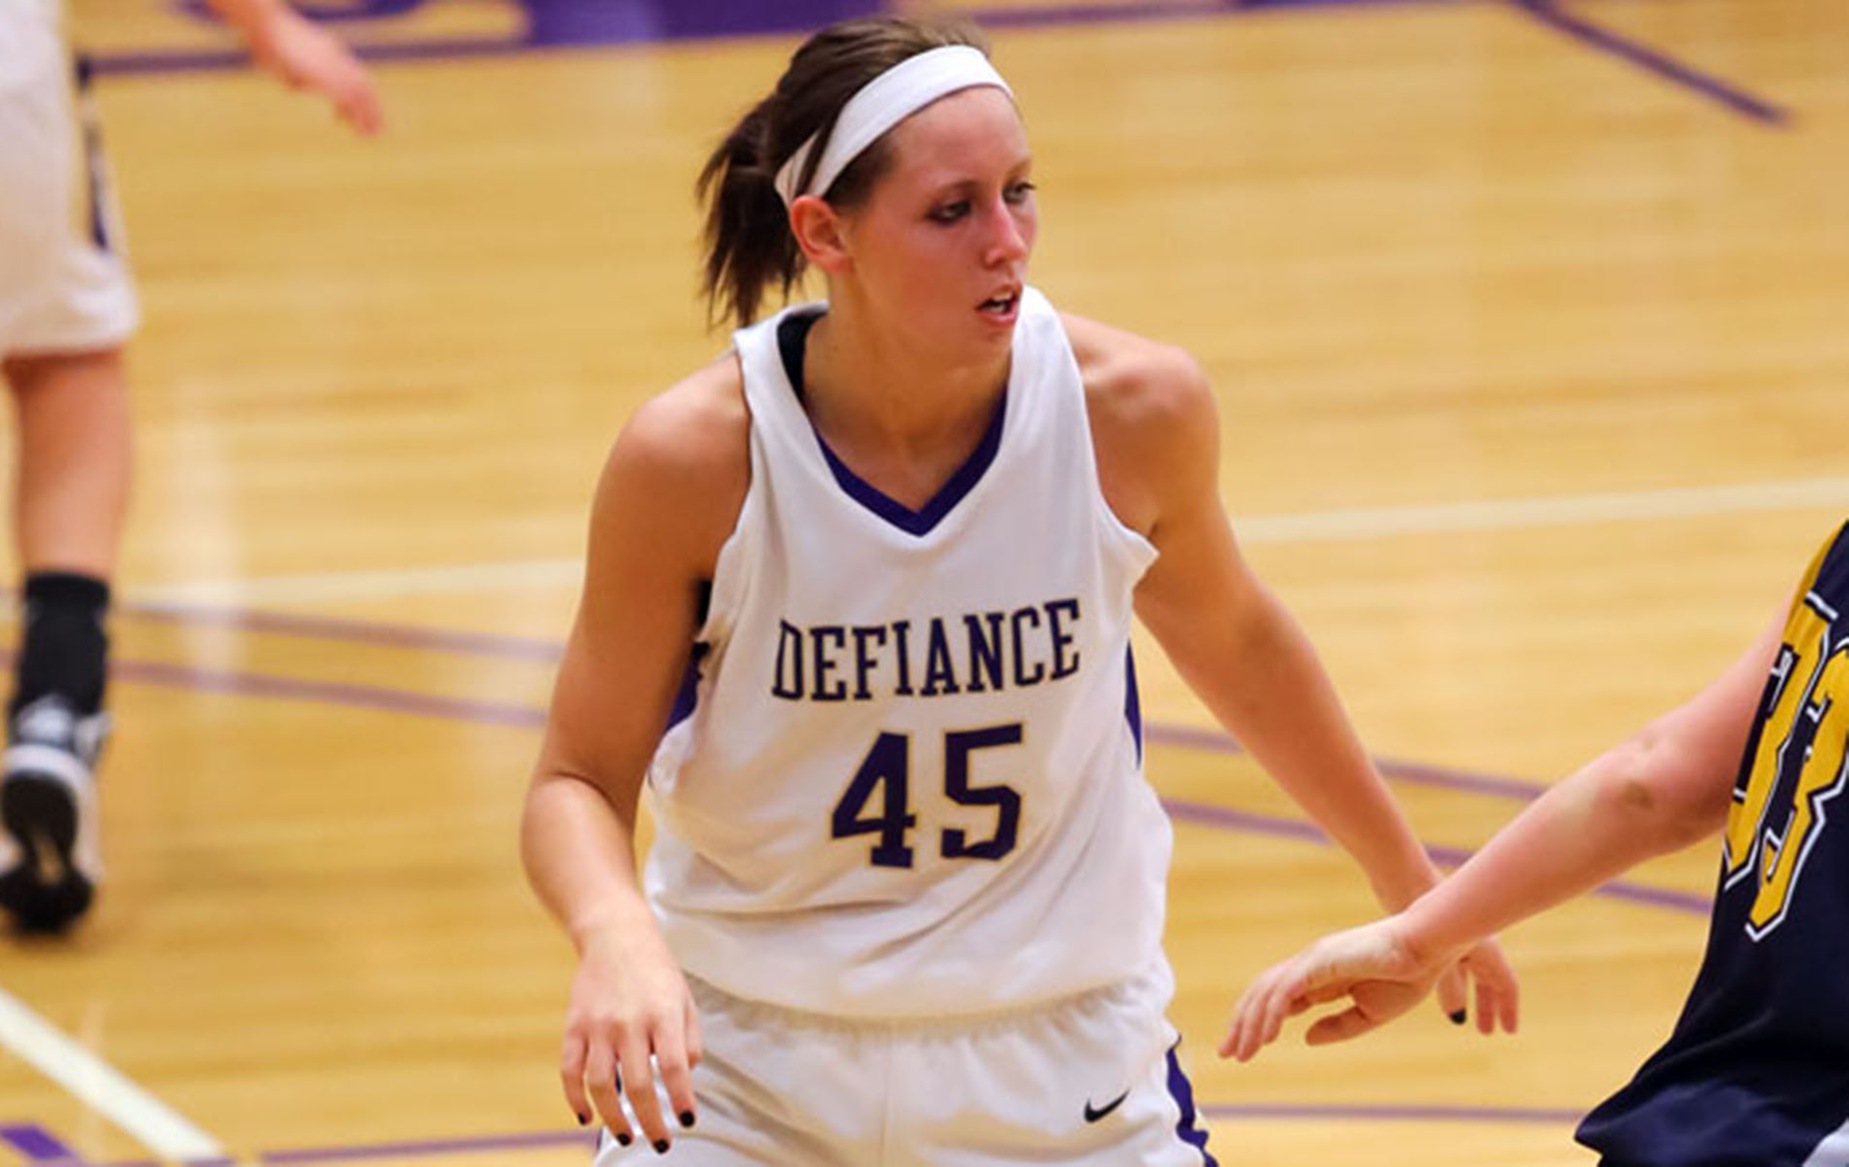 Defiance's Season Ends in First Round of HCAC Tournament